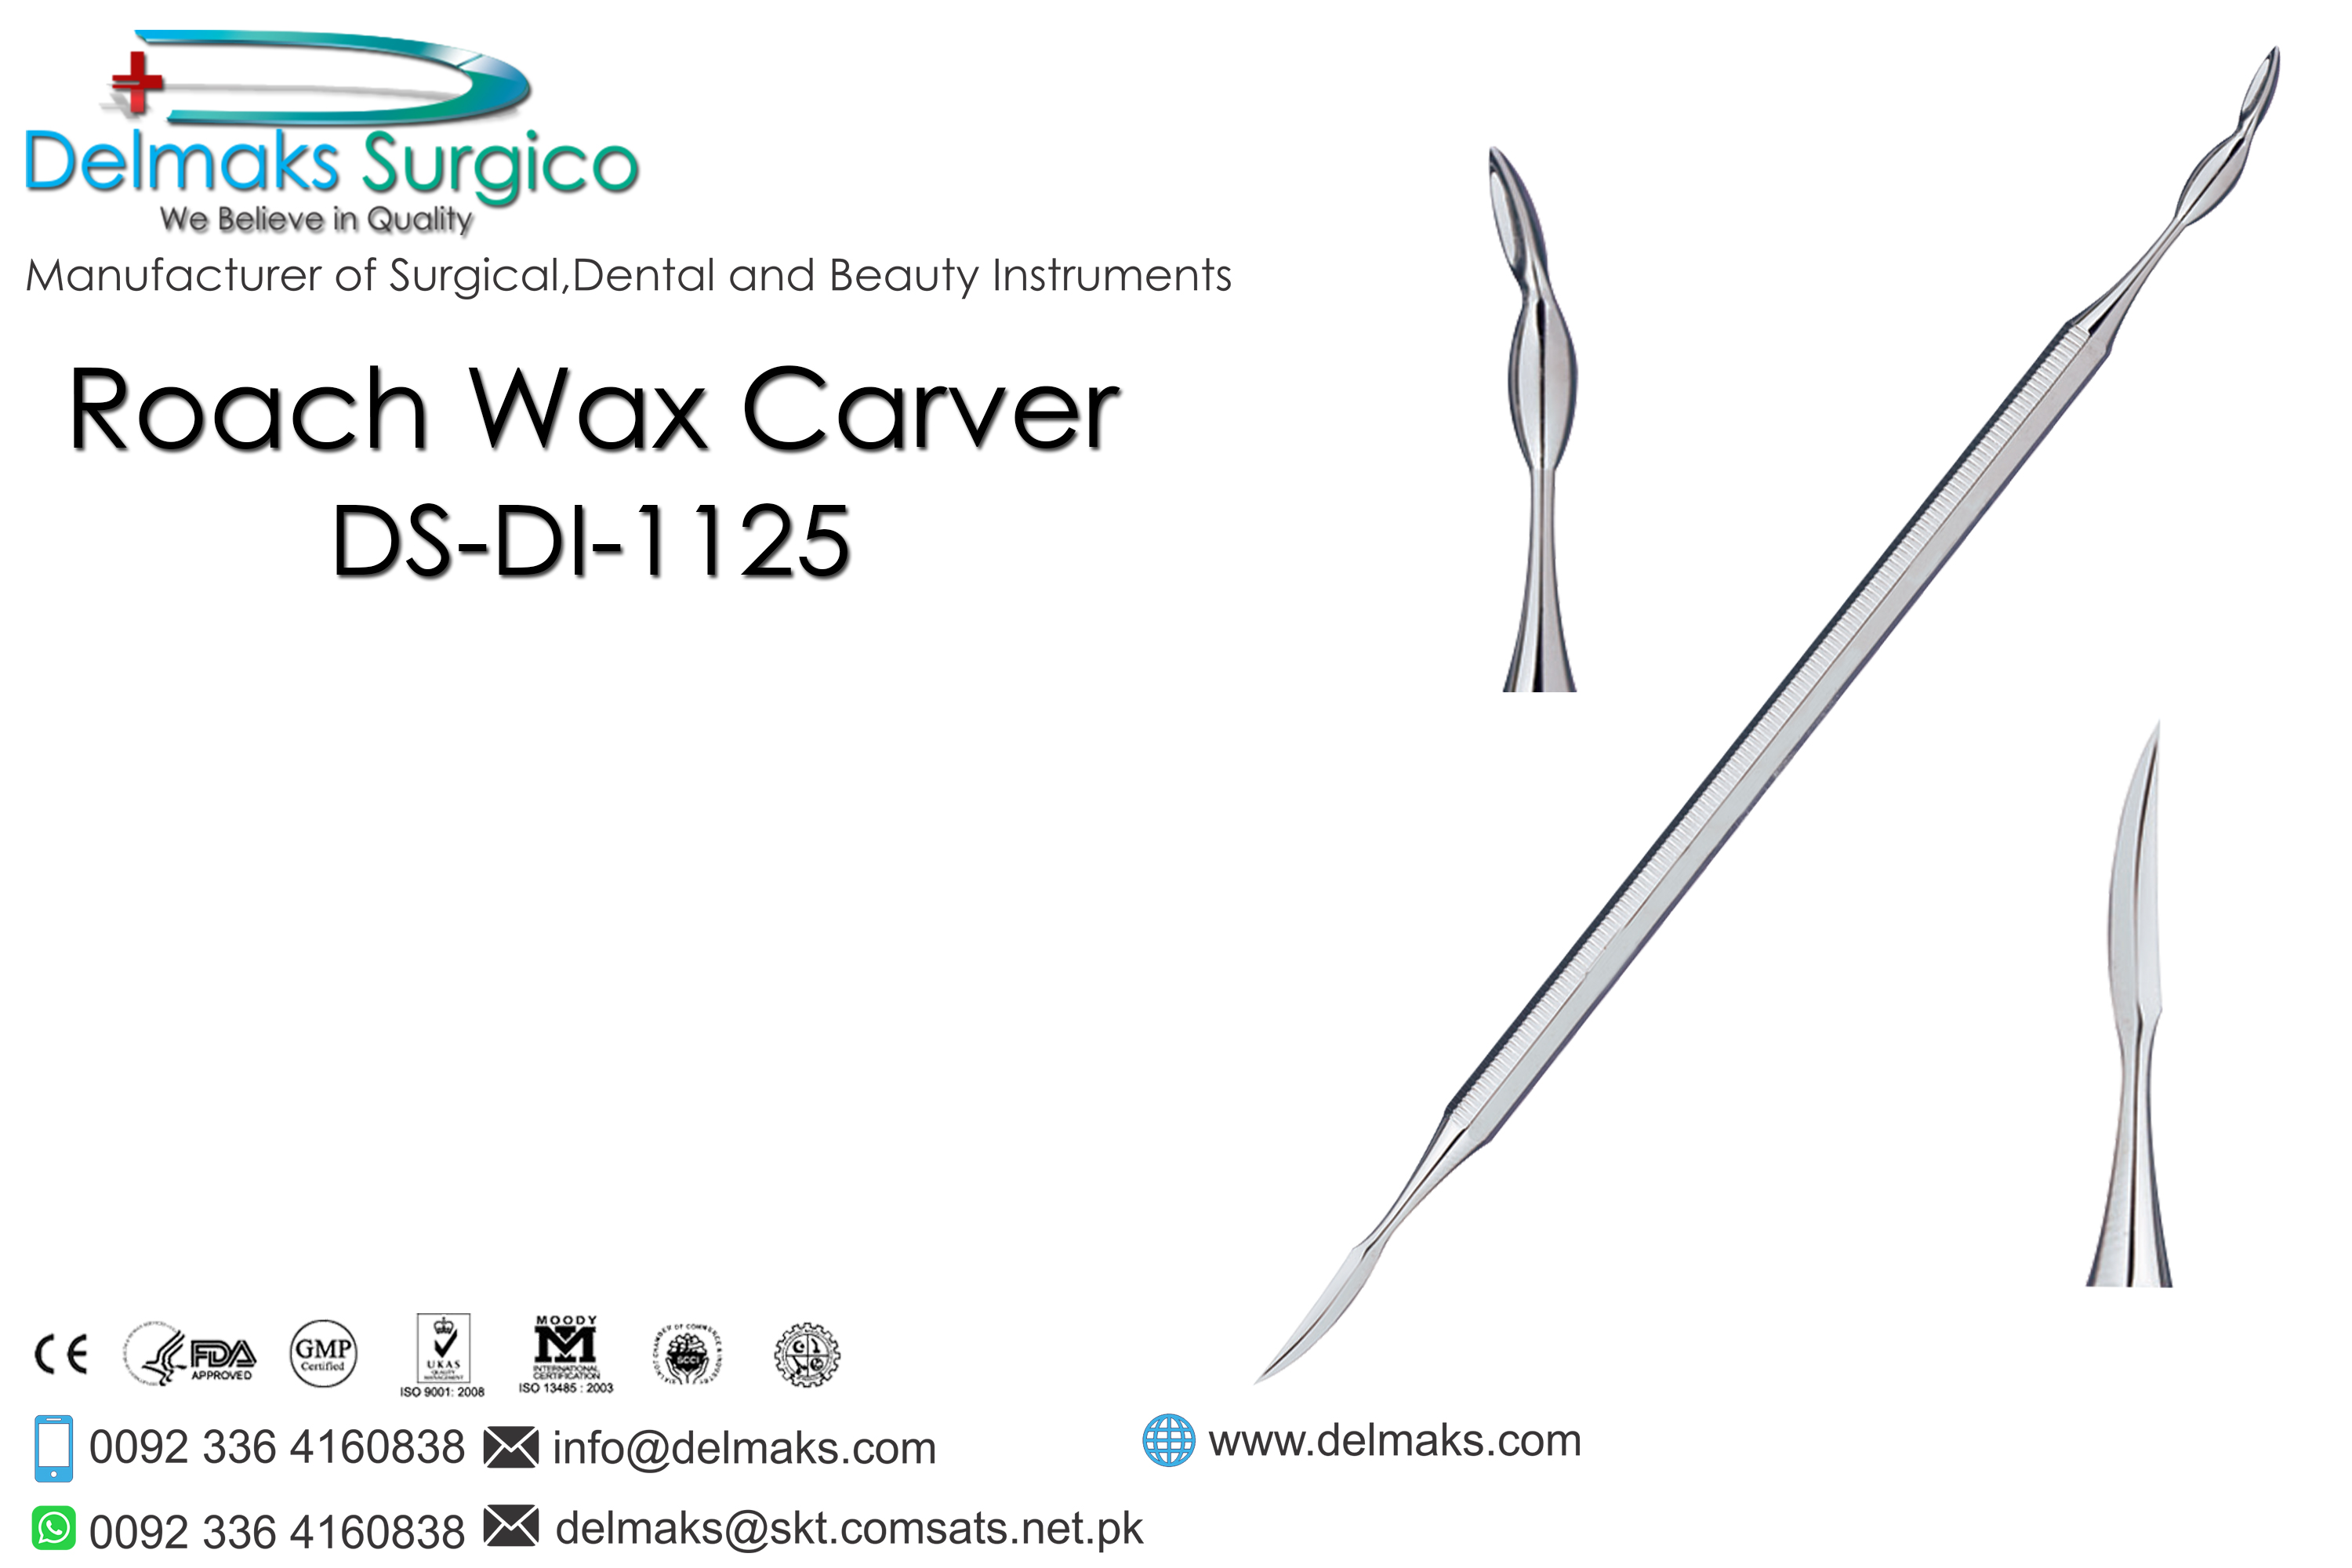 Roach Wax Carver-Laboratory Instruments And Equipments-Dental Instruments-Delmaks Surgico